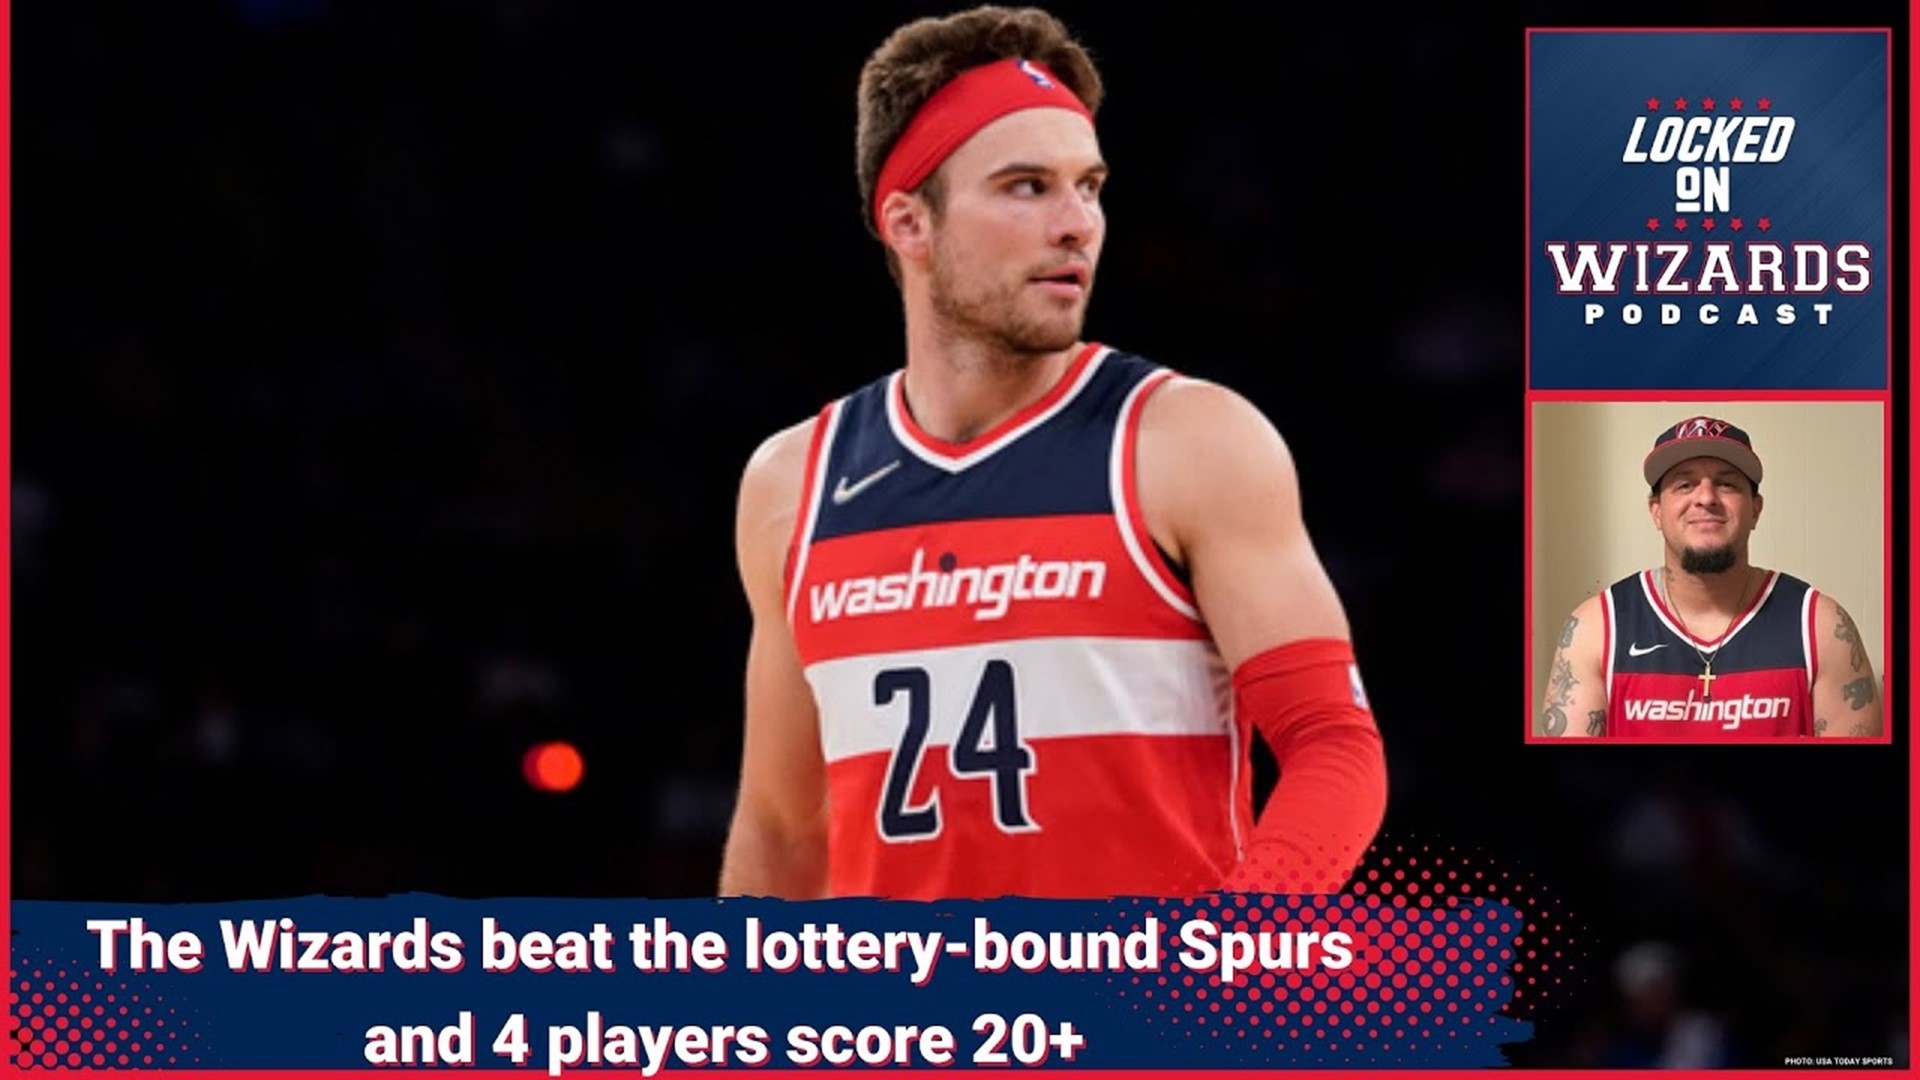 Brandon Discusses the Wizard's win over the lottery-bound San Antonio Spurs. He talks about the performance of the young core of Kispert and Avdija.